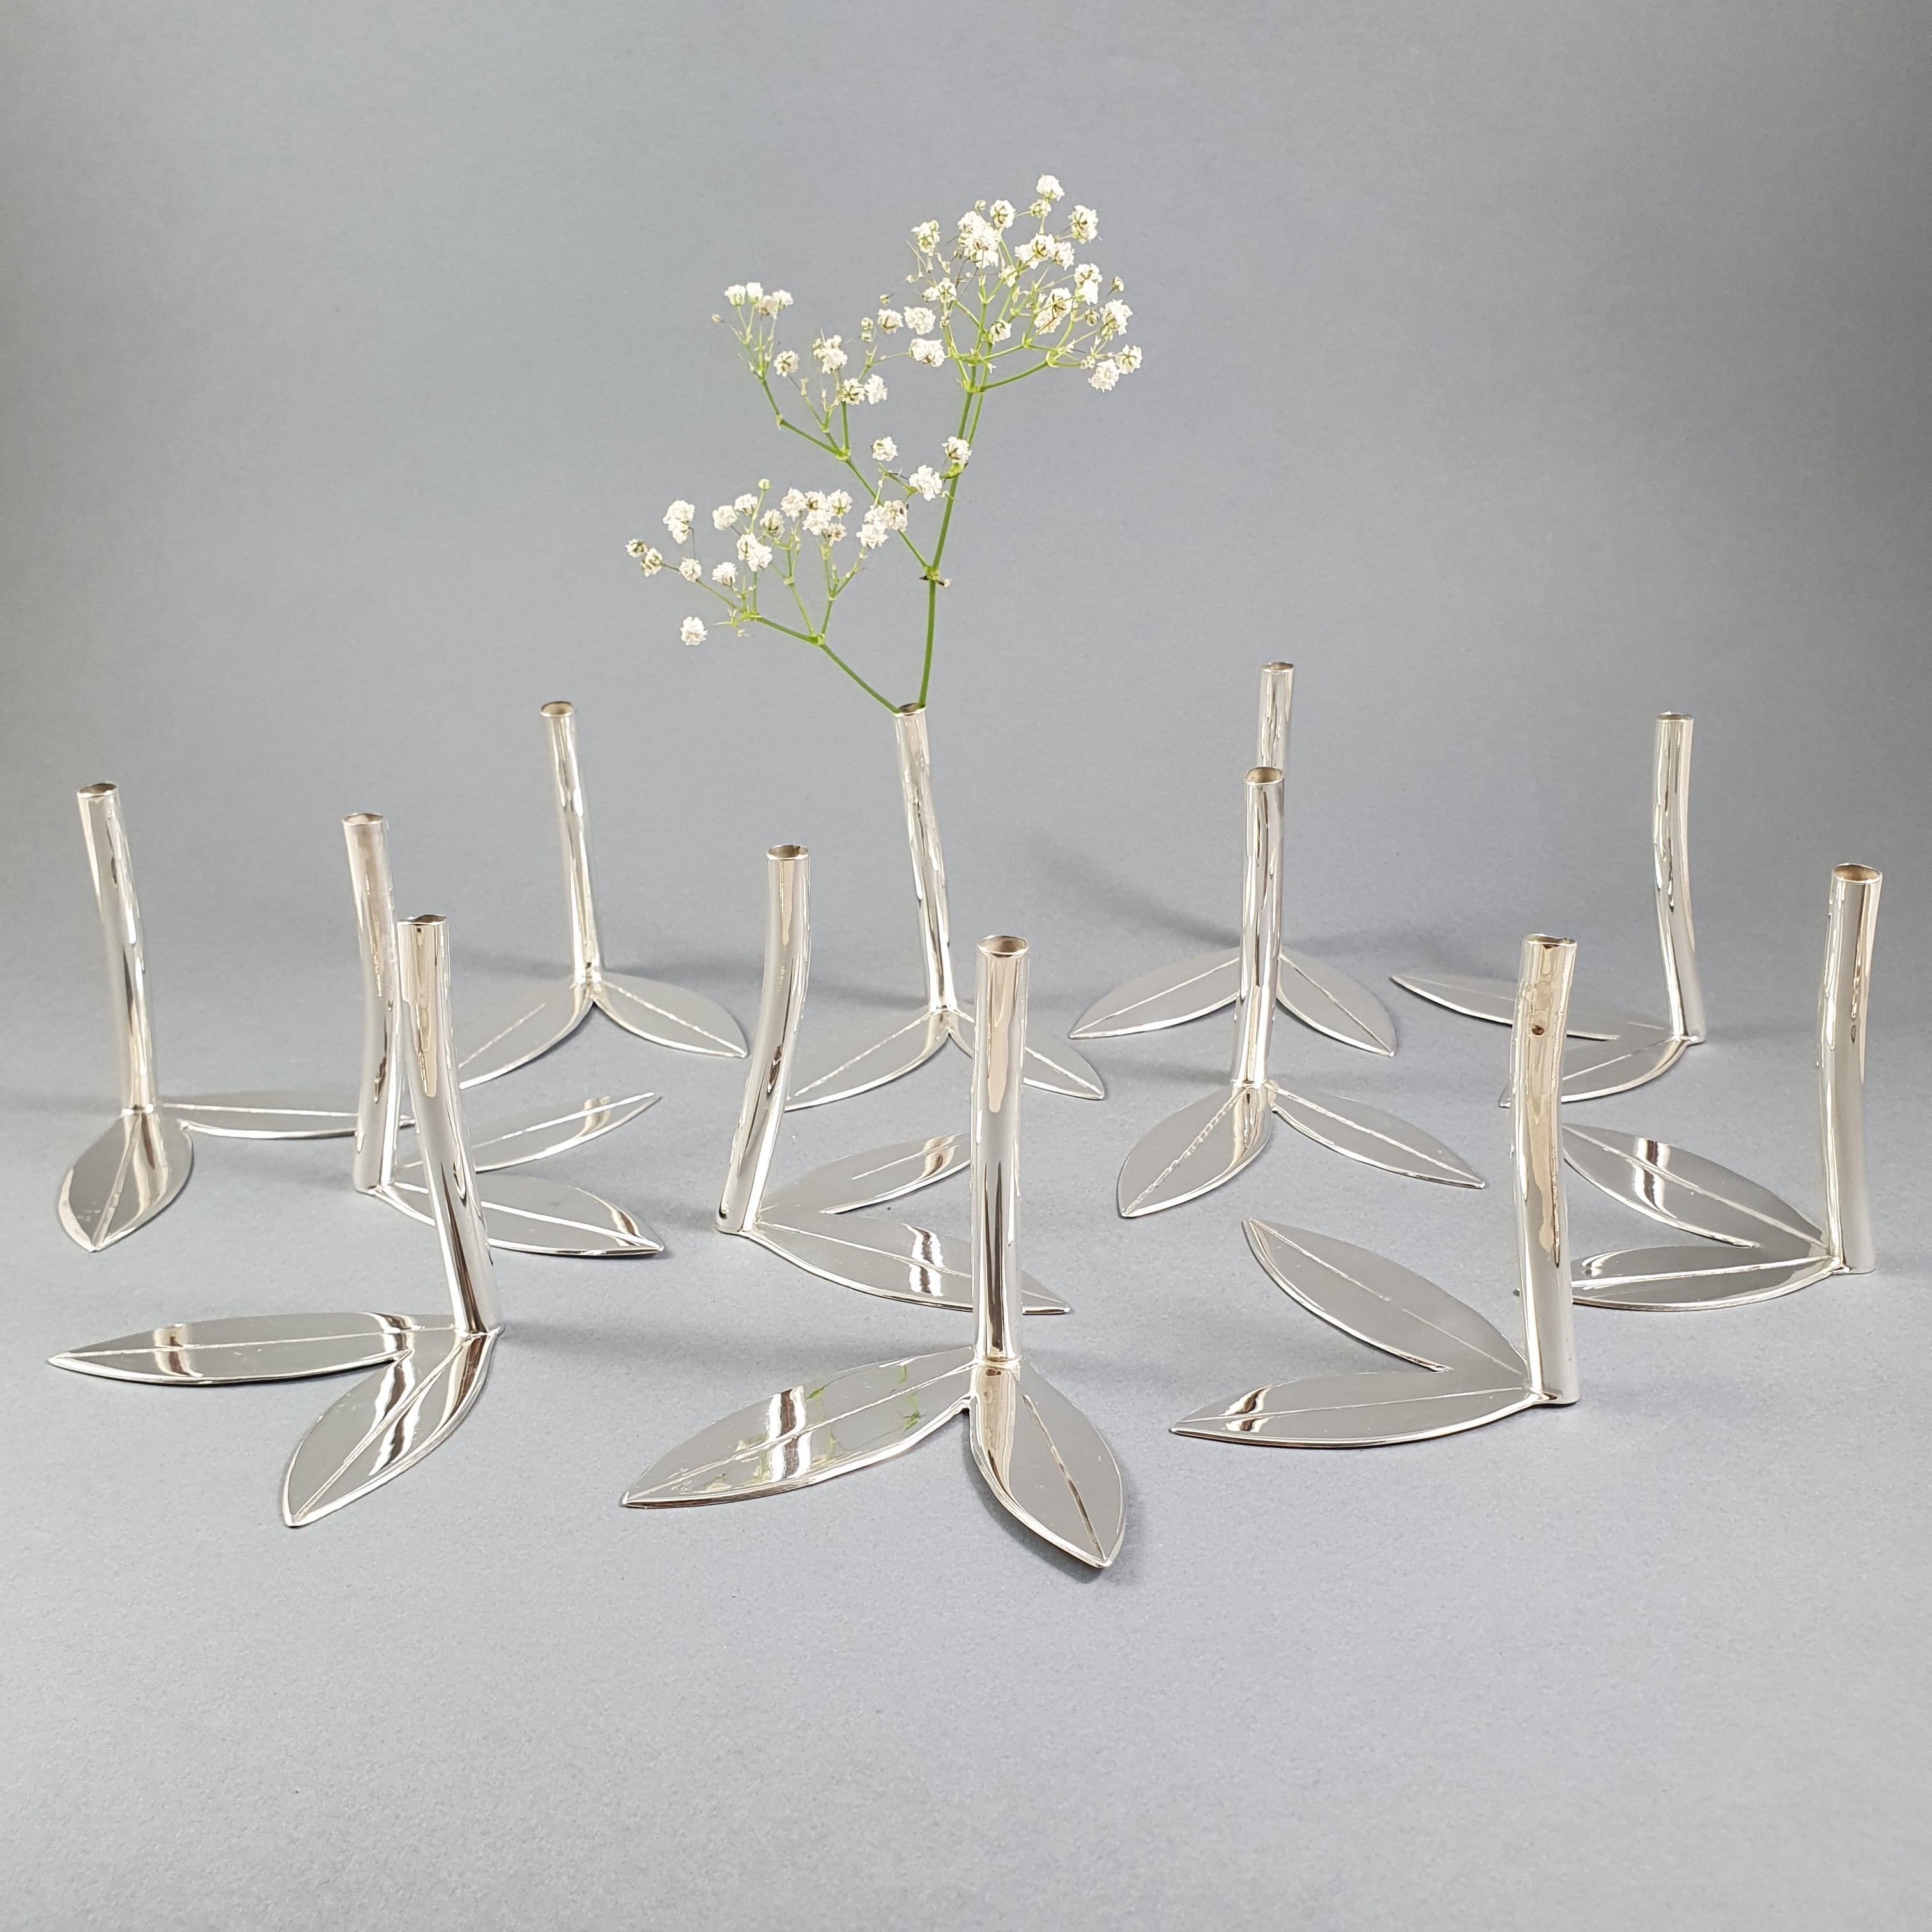 12 sterling Silver individuals vases in the shape of a leafy branch

Italian work circa 1970

Hallmarked 925
Height: 6.5 cm - 2.5 inches
Total weight: 252 grams.
 